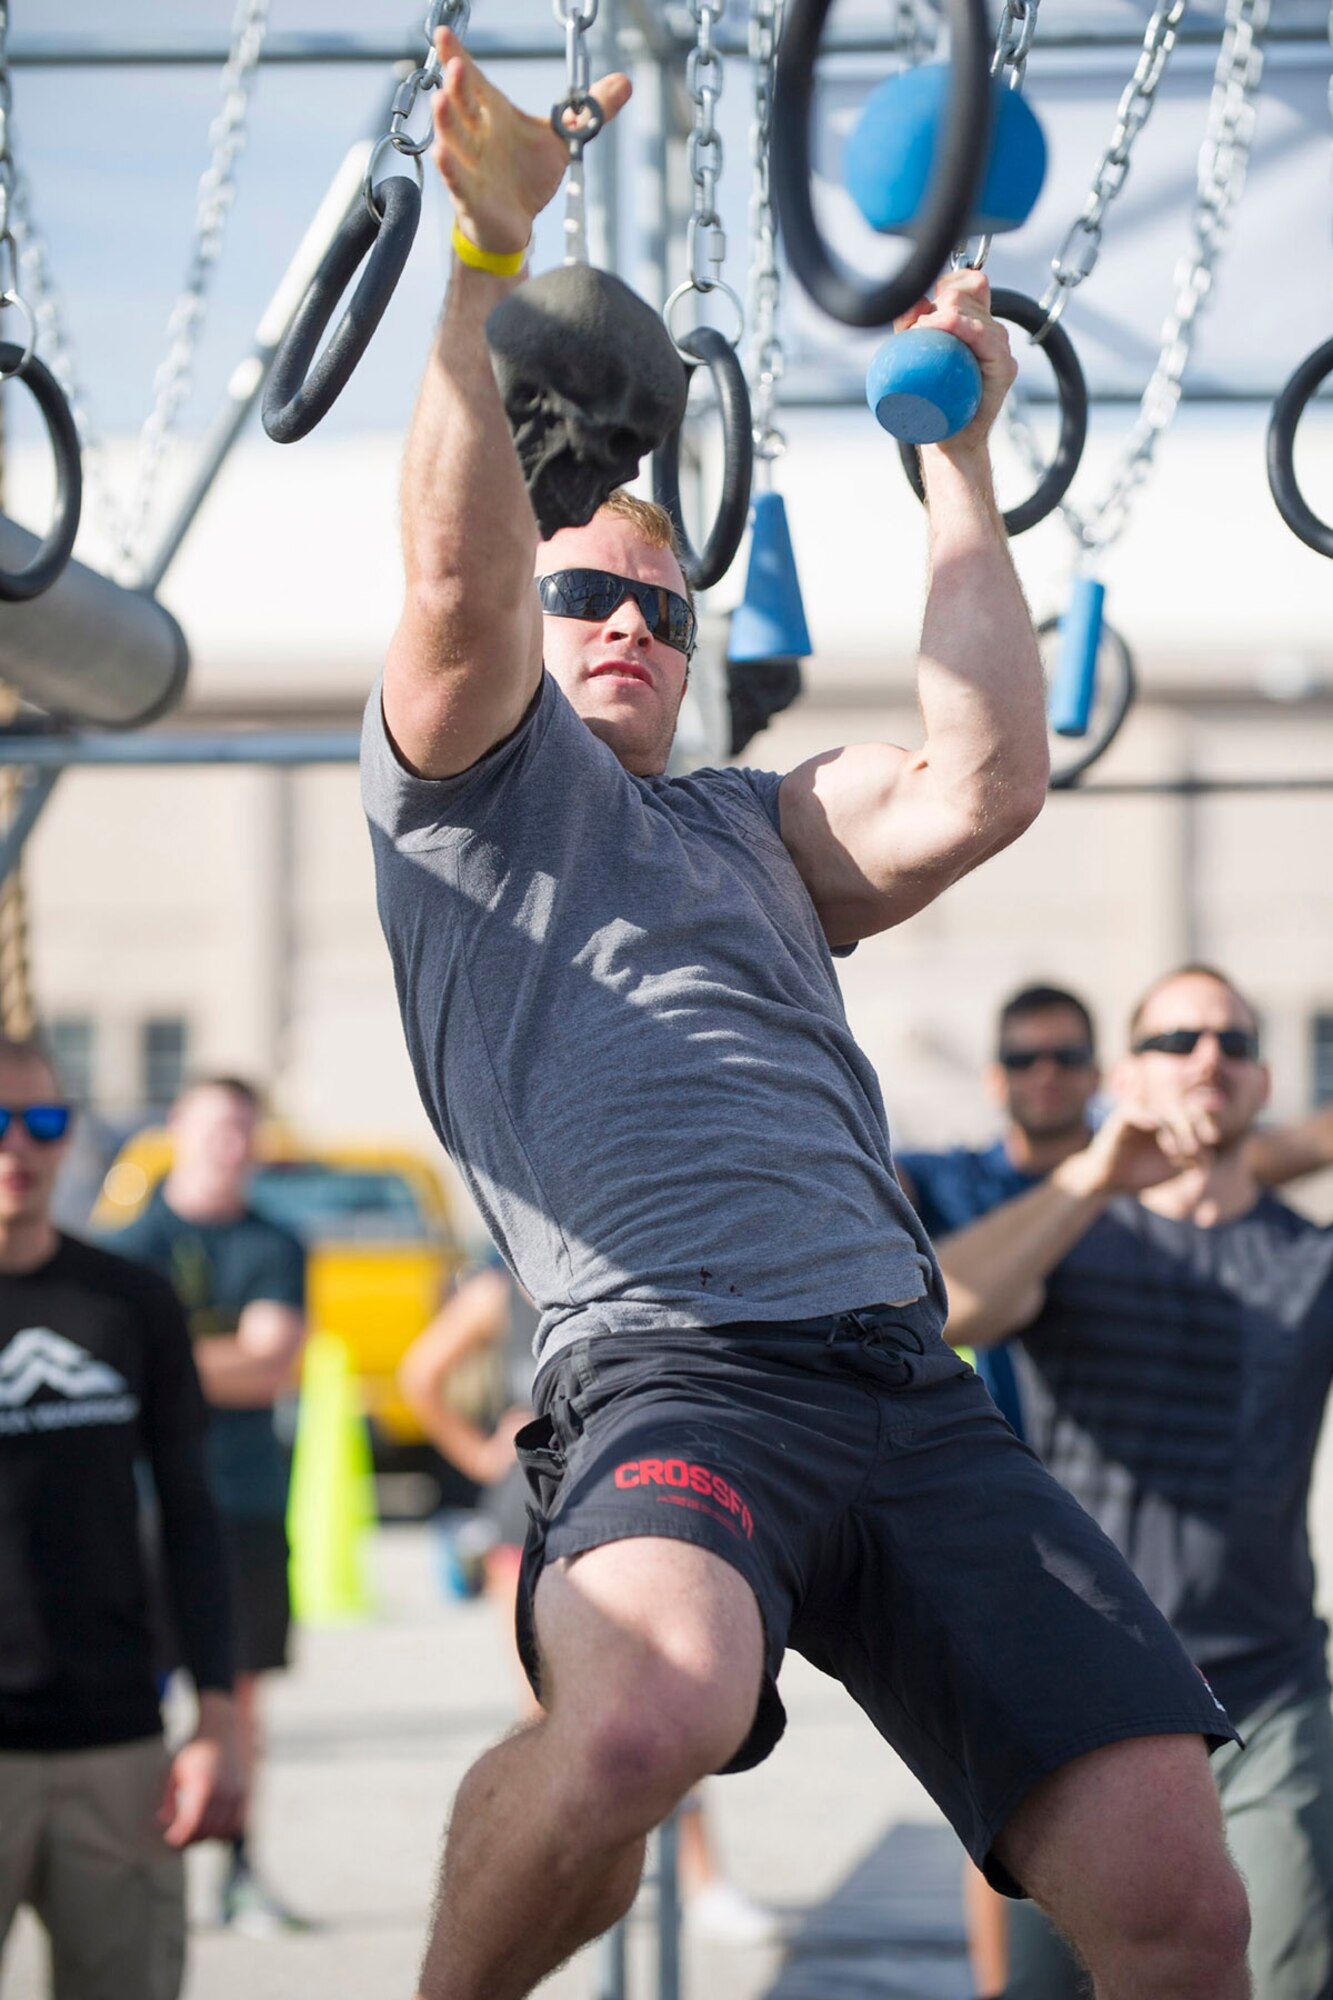 Staff Sgt. Michael McCune, 308th Rescue Squadron survival, evasion, resistance and escape specialist, makes his way through the radial wings portion of the Alpha Warrior Course April 22, 2017 set up at Patrick Air Force Base, Florida. The course, which included obstacles from the hit show American Ninja Warrior, enticed 37 Airmen and civilians from the base to compete. (U.S. Air Force photo/Phillip Sunkel)